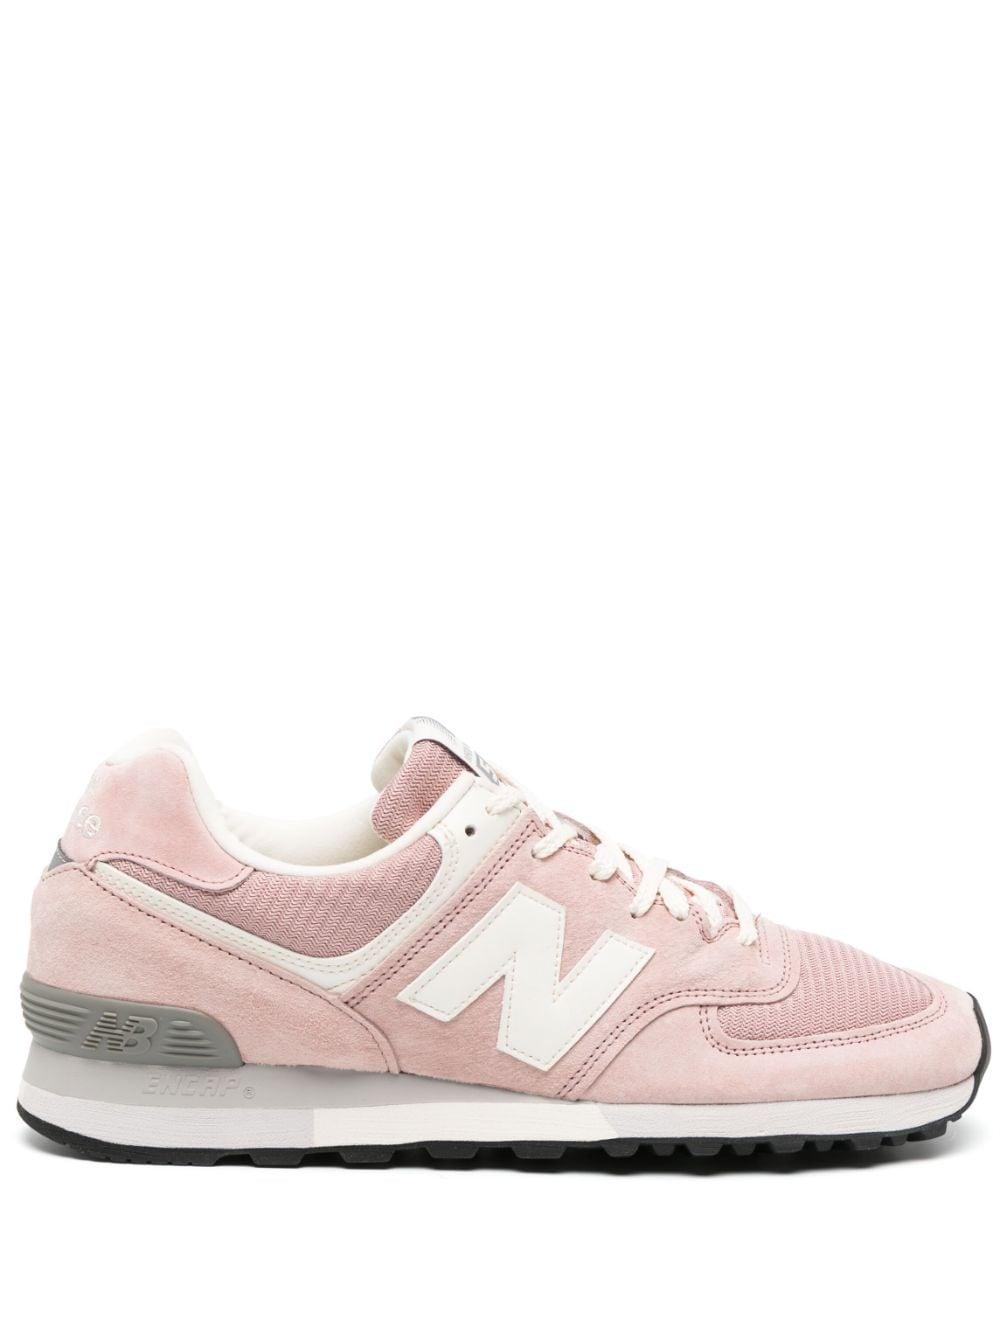 New Balance 576 Low-top Sneakers in Pink for Men | Lyst